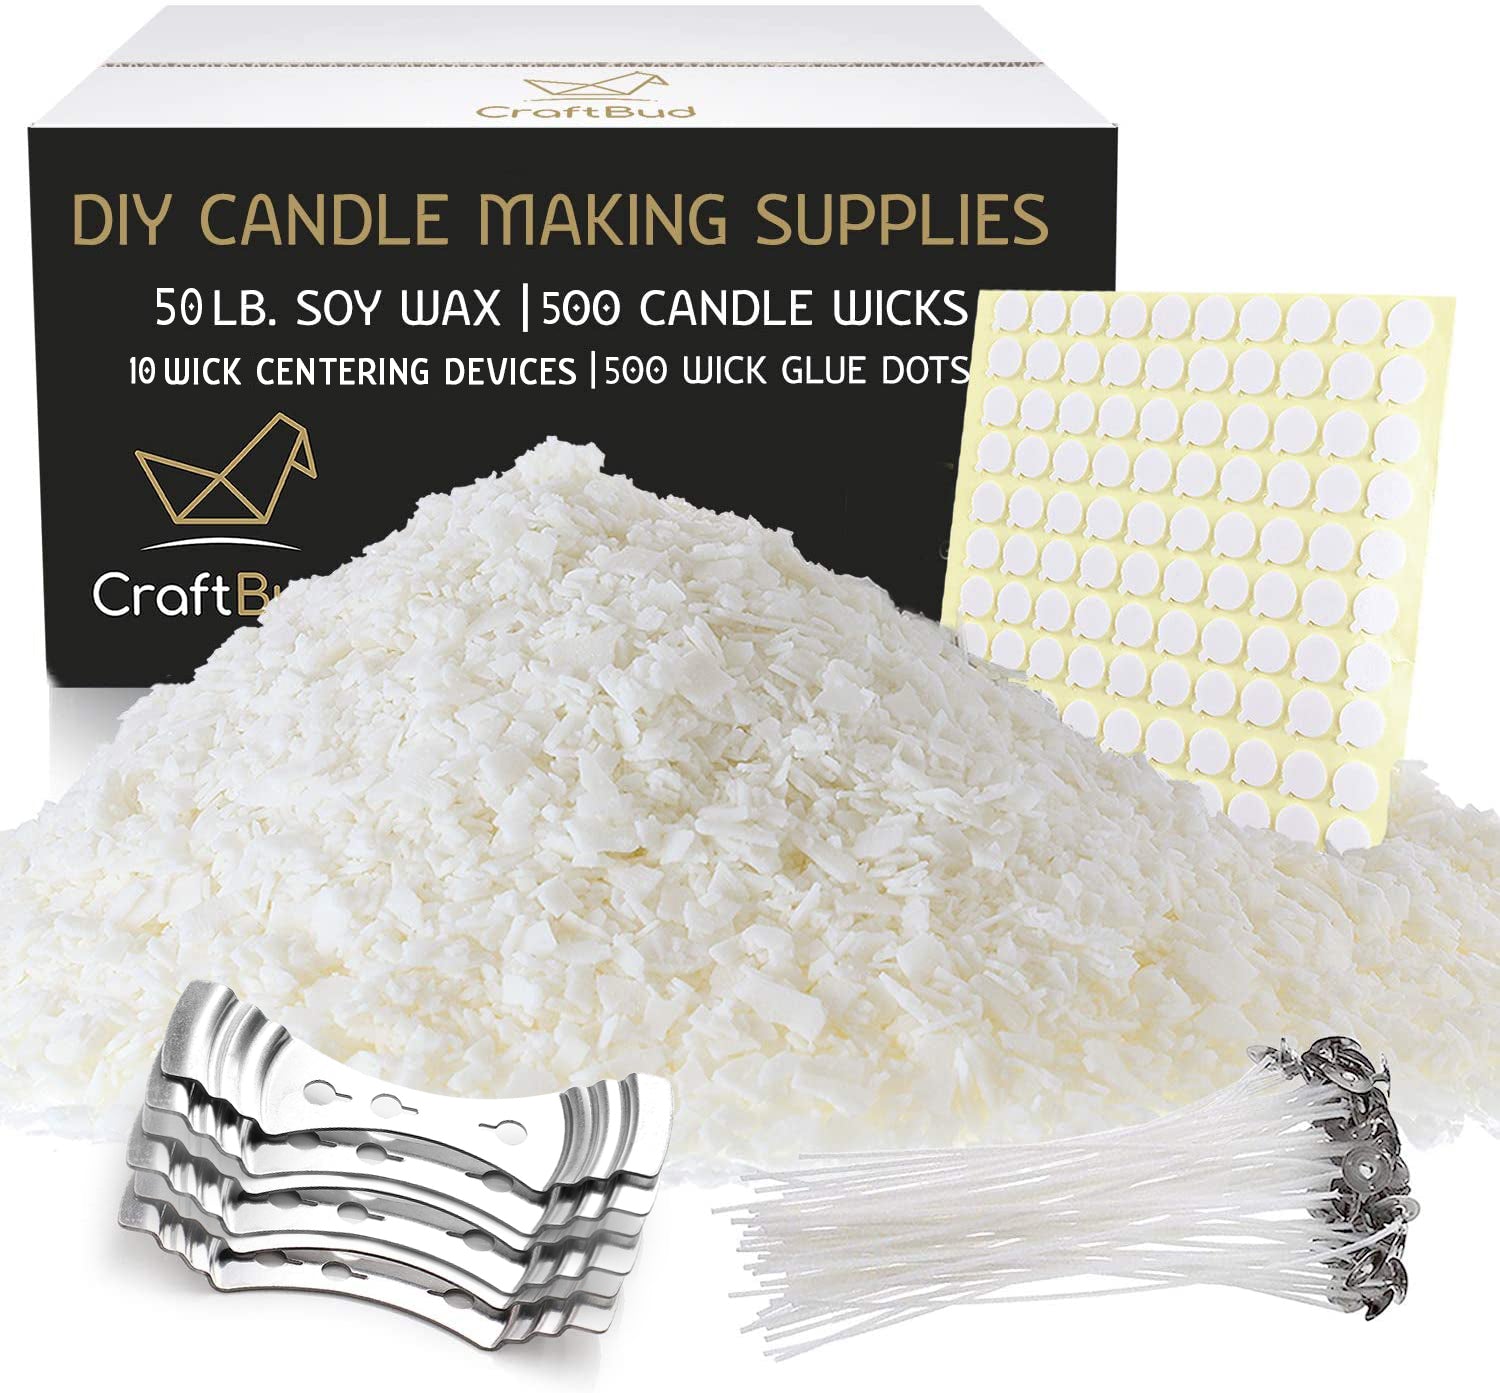 50 lb Natural Soy Candle Wax for Candle Making with Cotton Candle Wicks, Wick Stickers, and Centering Devices